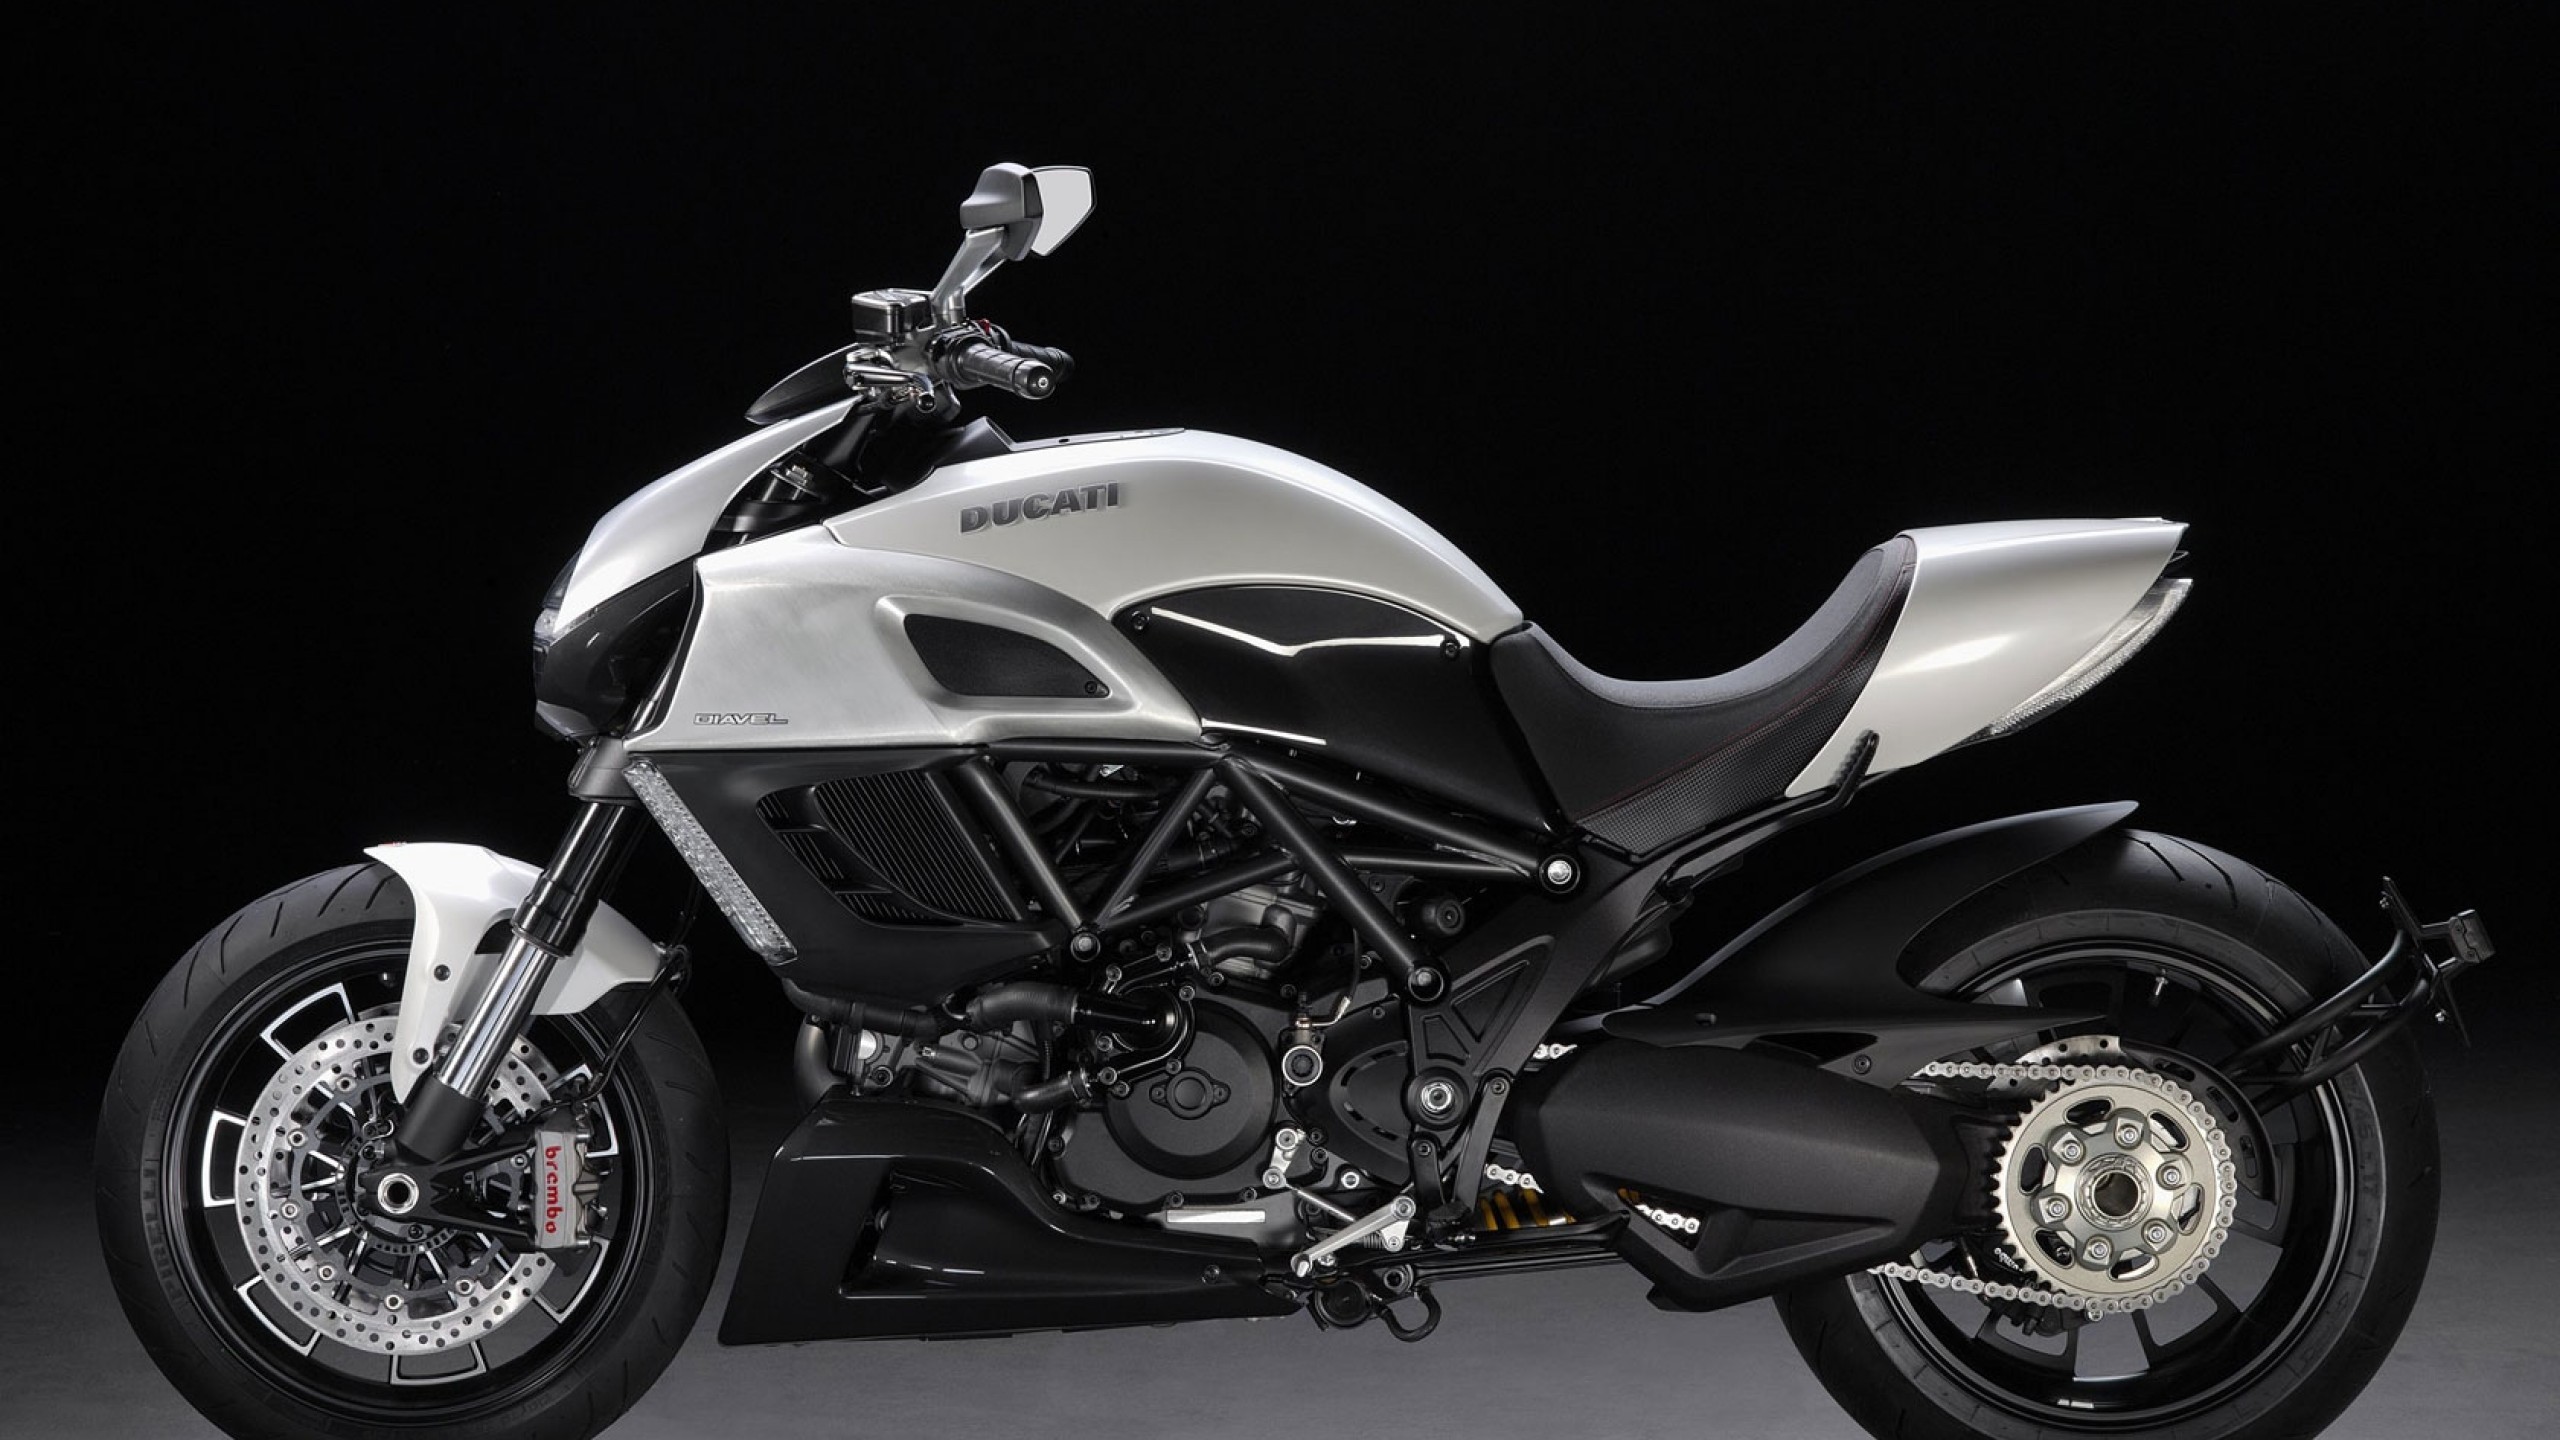 Ducati Diavel, Silver, Side View, Motorcycle - Ducati Diavel 2012 Wit - HD Wallpaper 